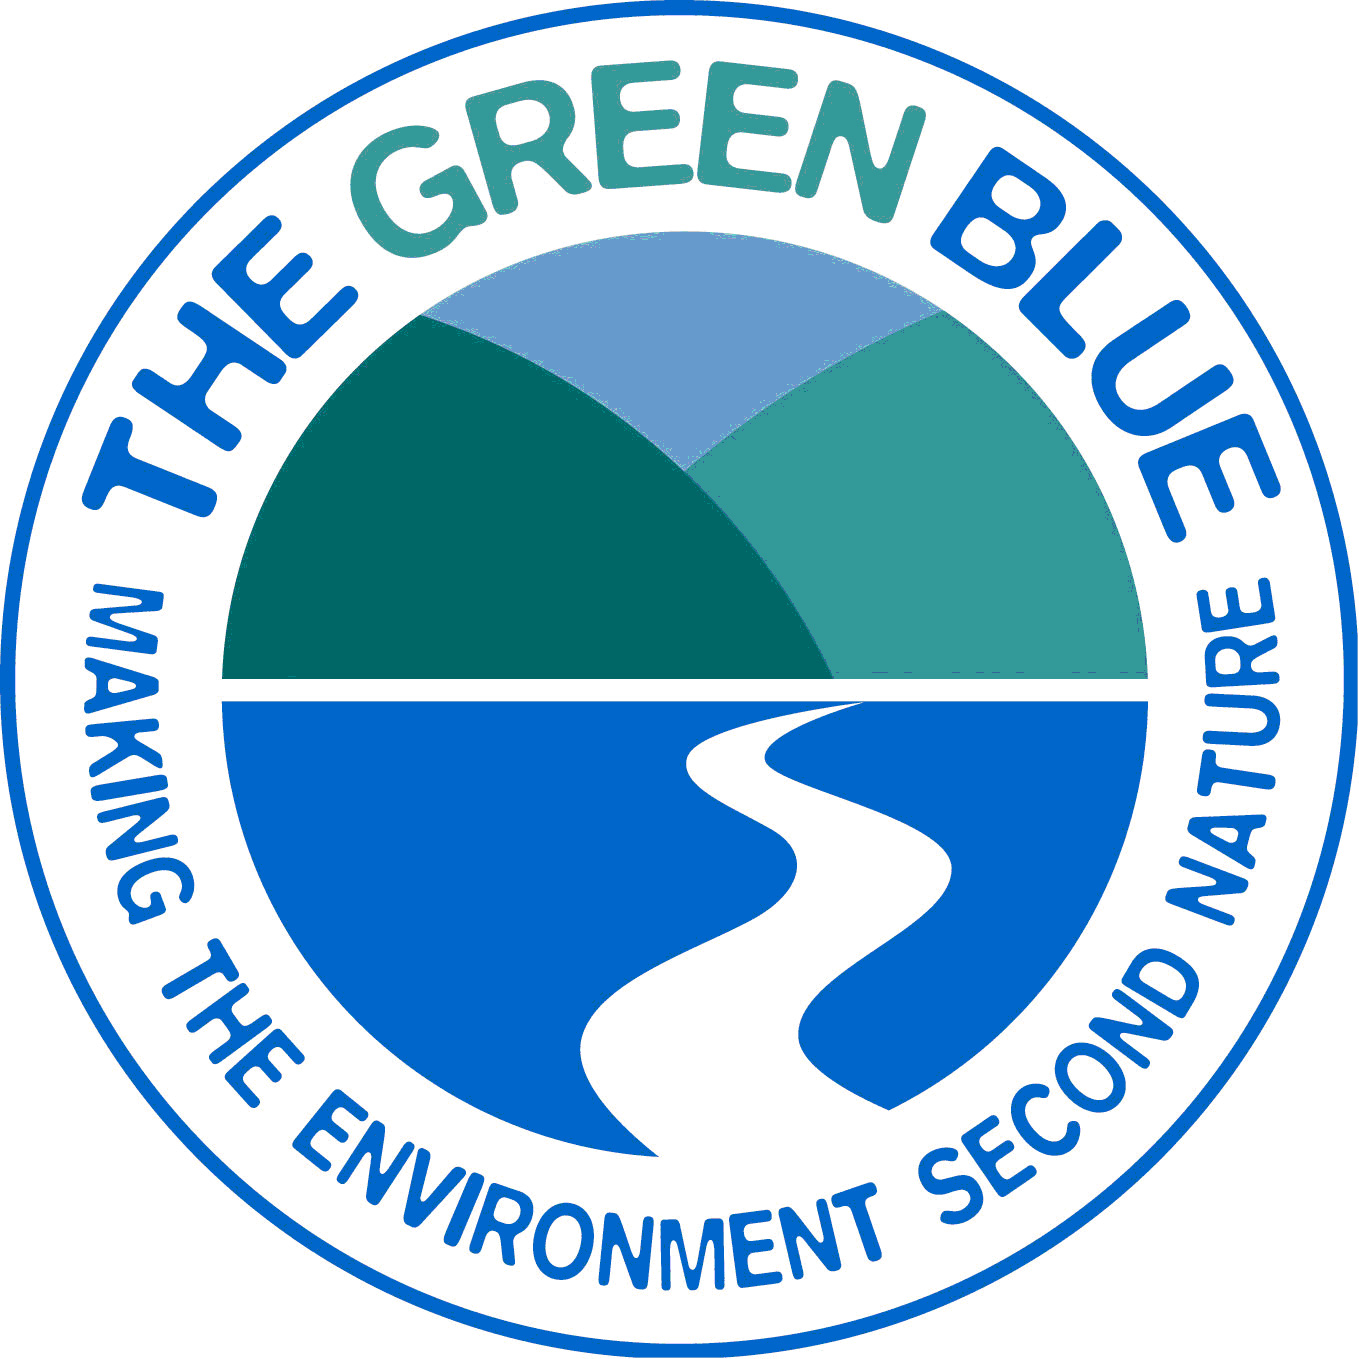 Green Blue logo and link to Green Blue website